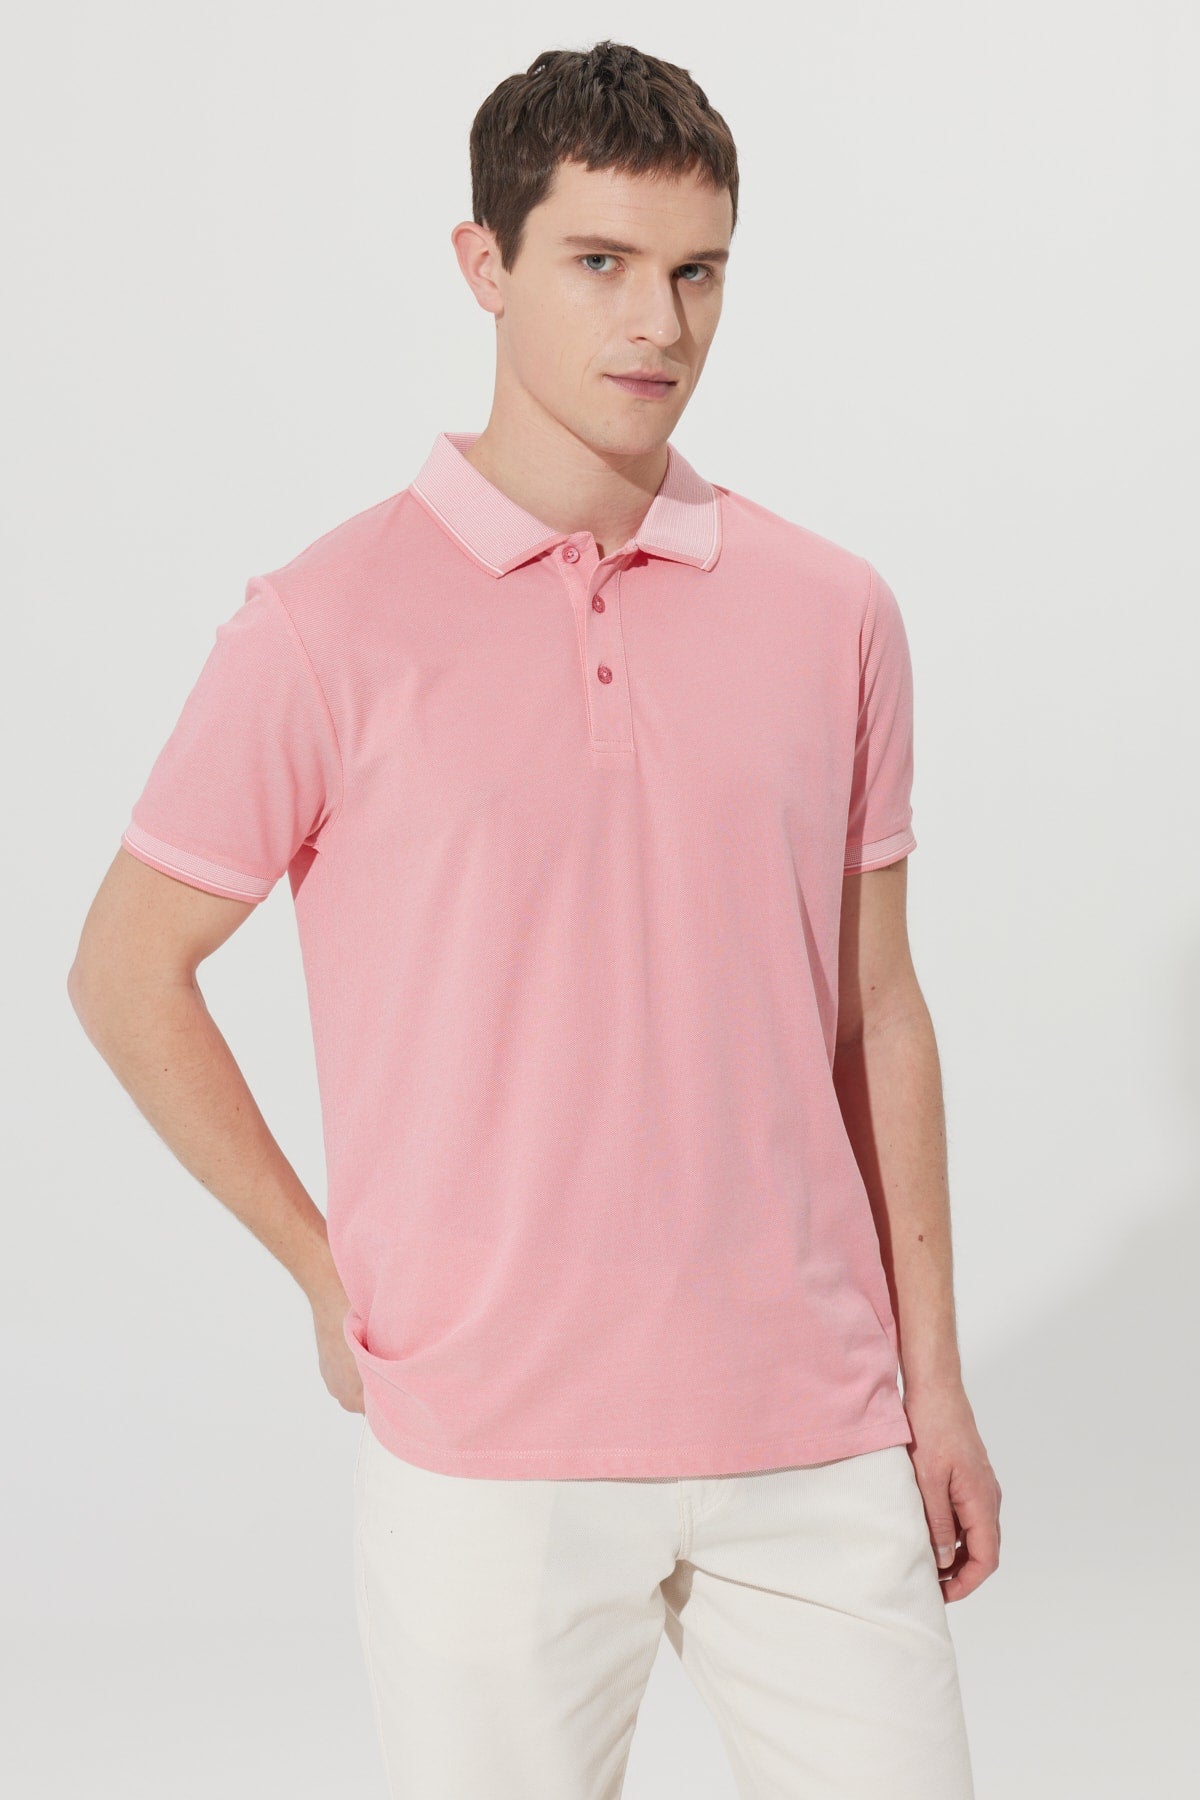 Men's Non-Shrink Cotton Fabric Slim Fit Slim Fit Pink-White Anti-roll Polo Neck T-Shirt